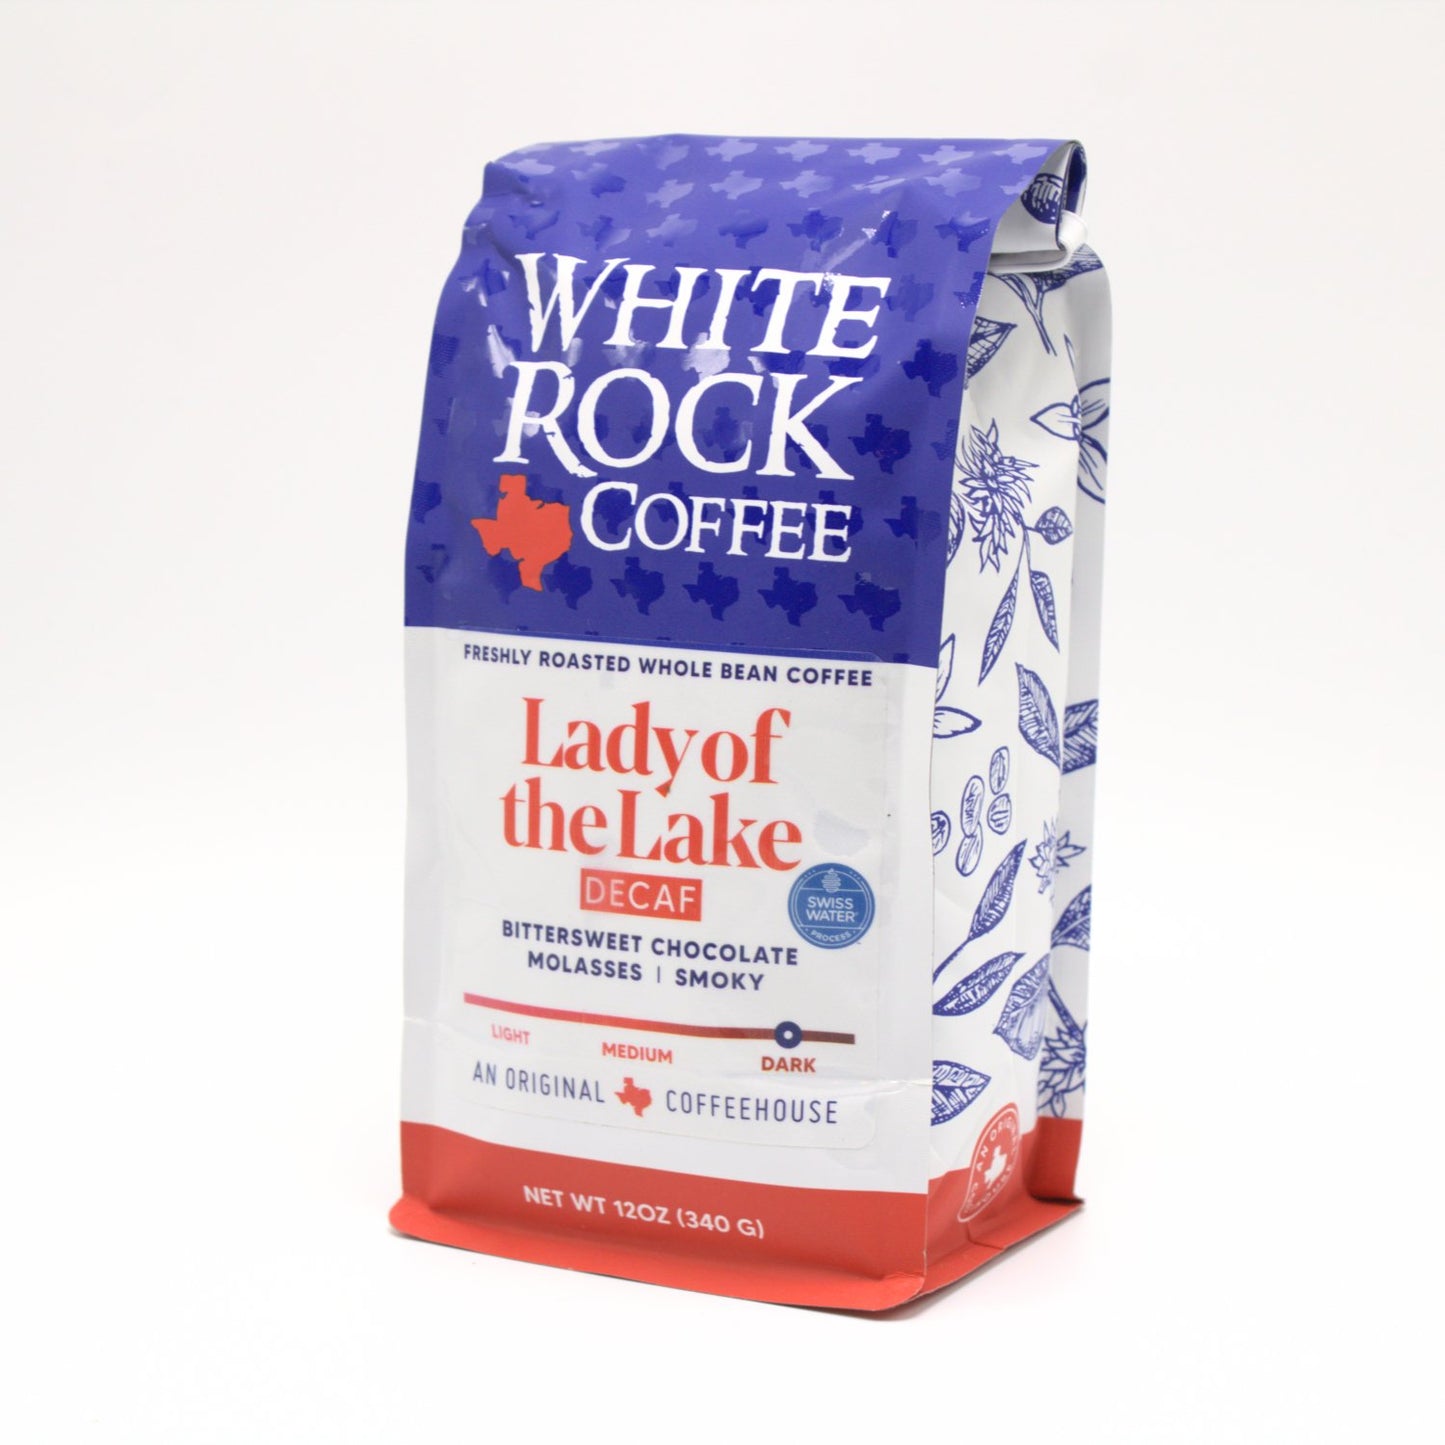 Decaf Lady of the Lake - White Rock Coffee